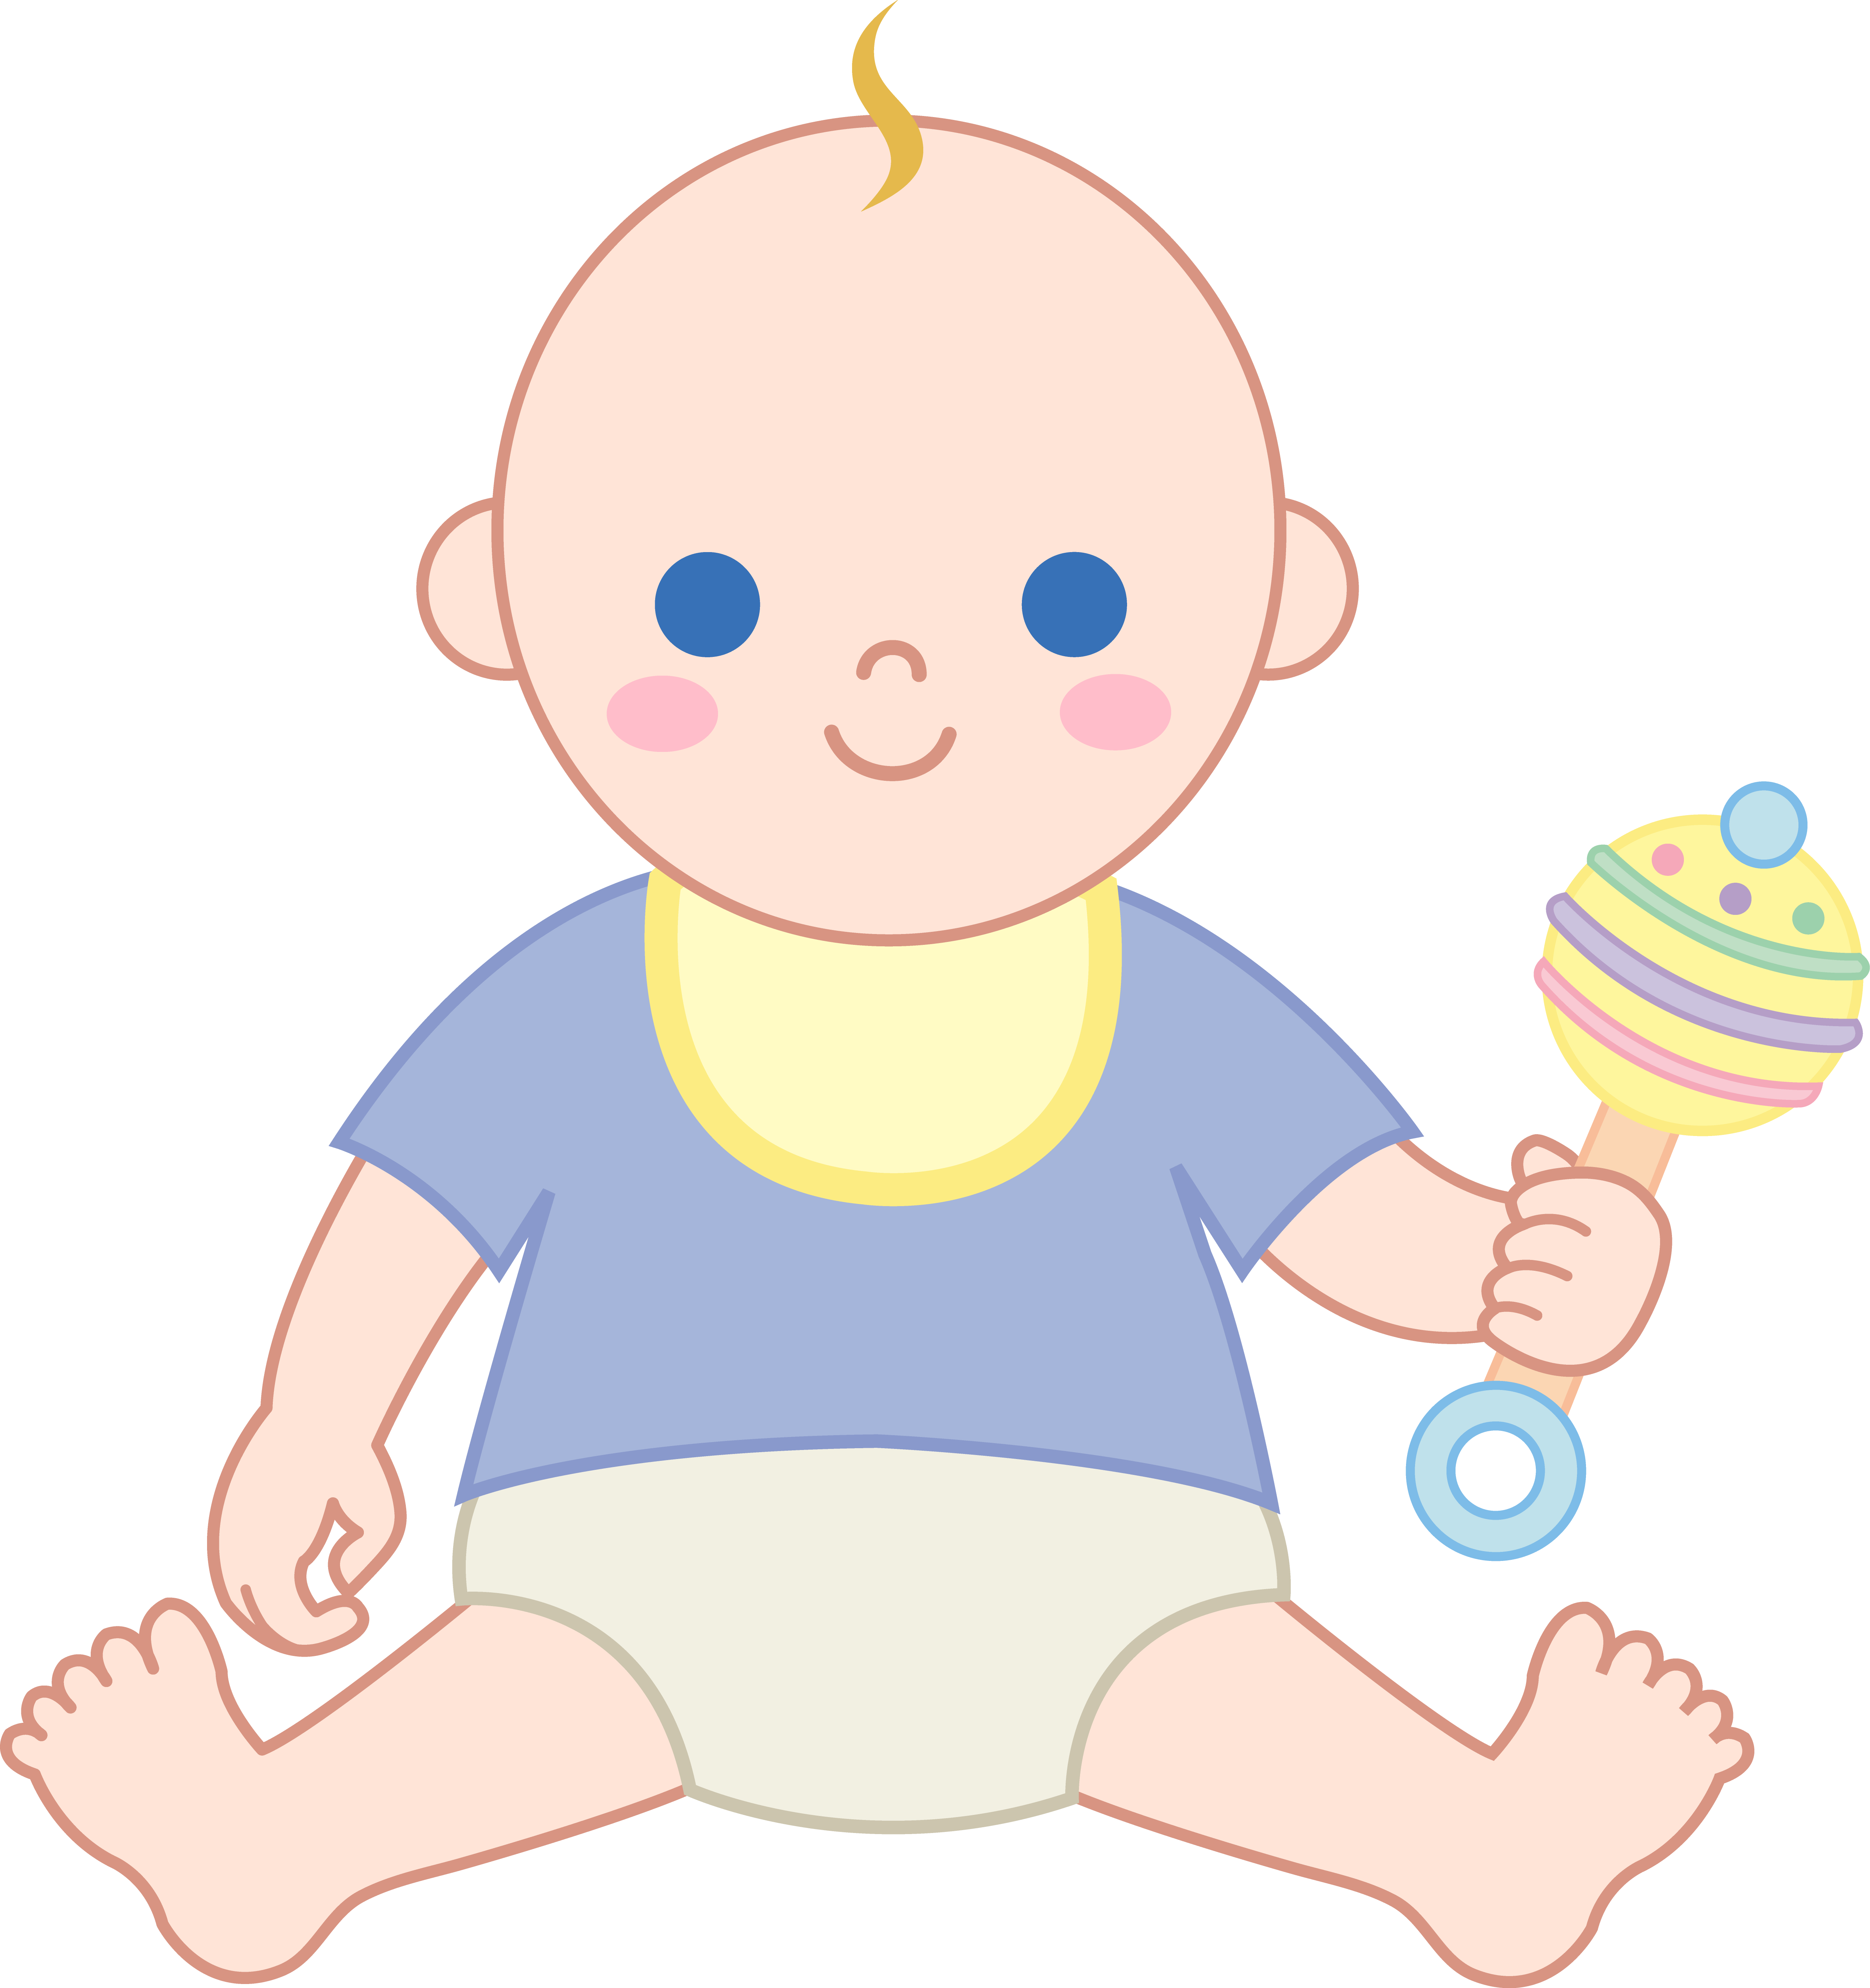 foot clipart baby girl